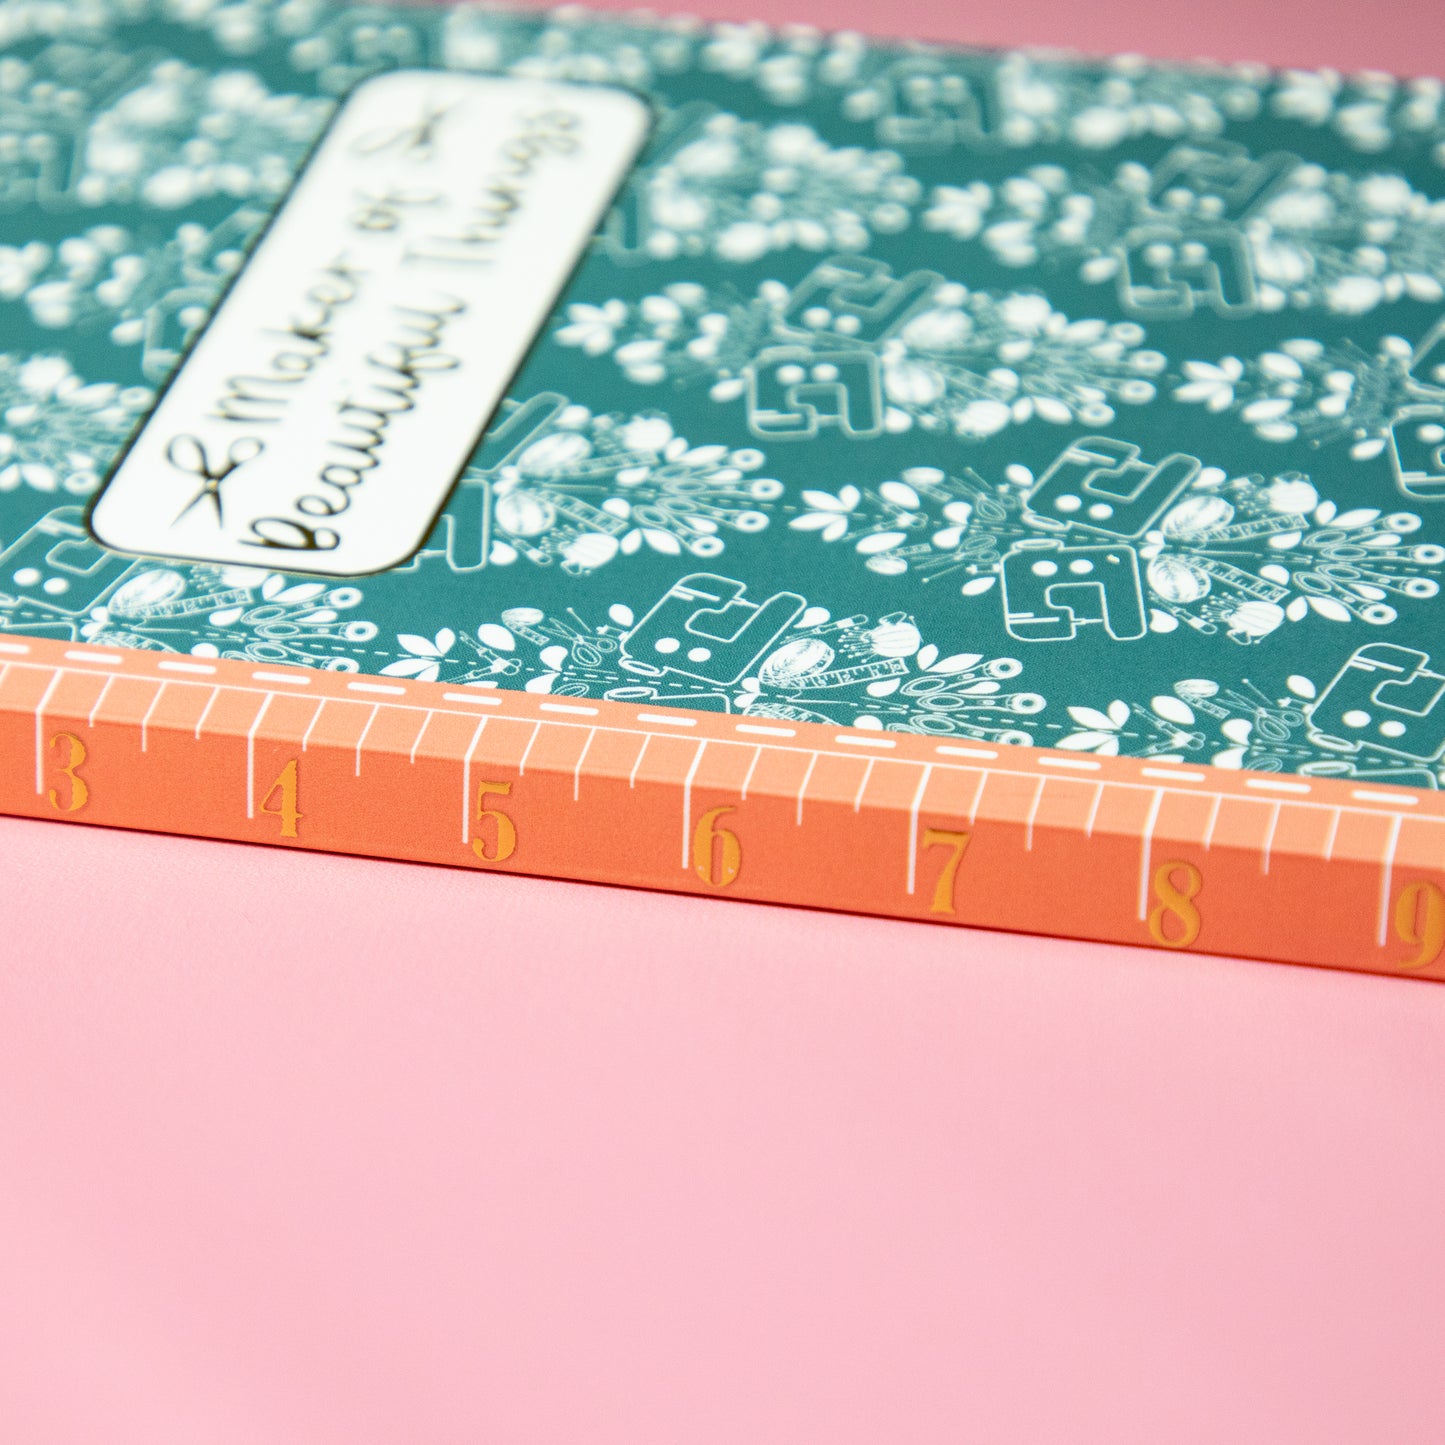 Gifts for Sewing Lovers Set, Sewing Notebook, pencils and paperclips